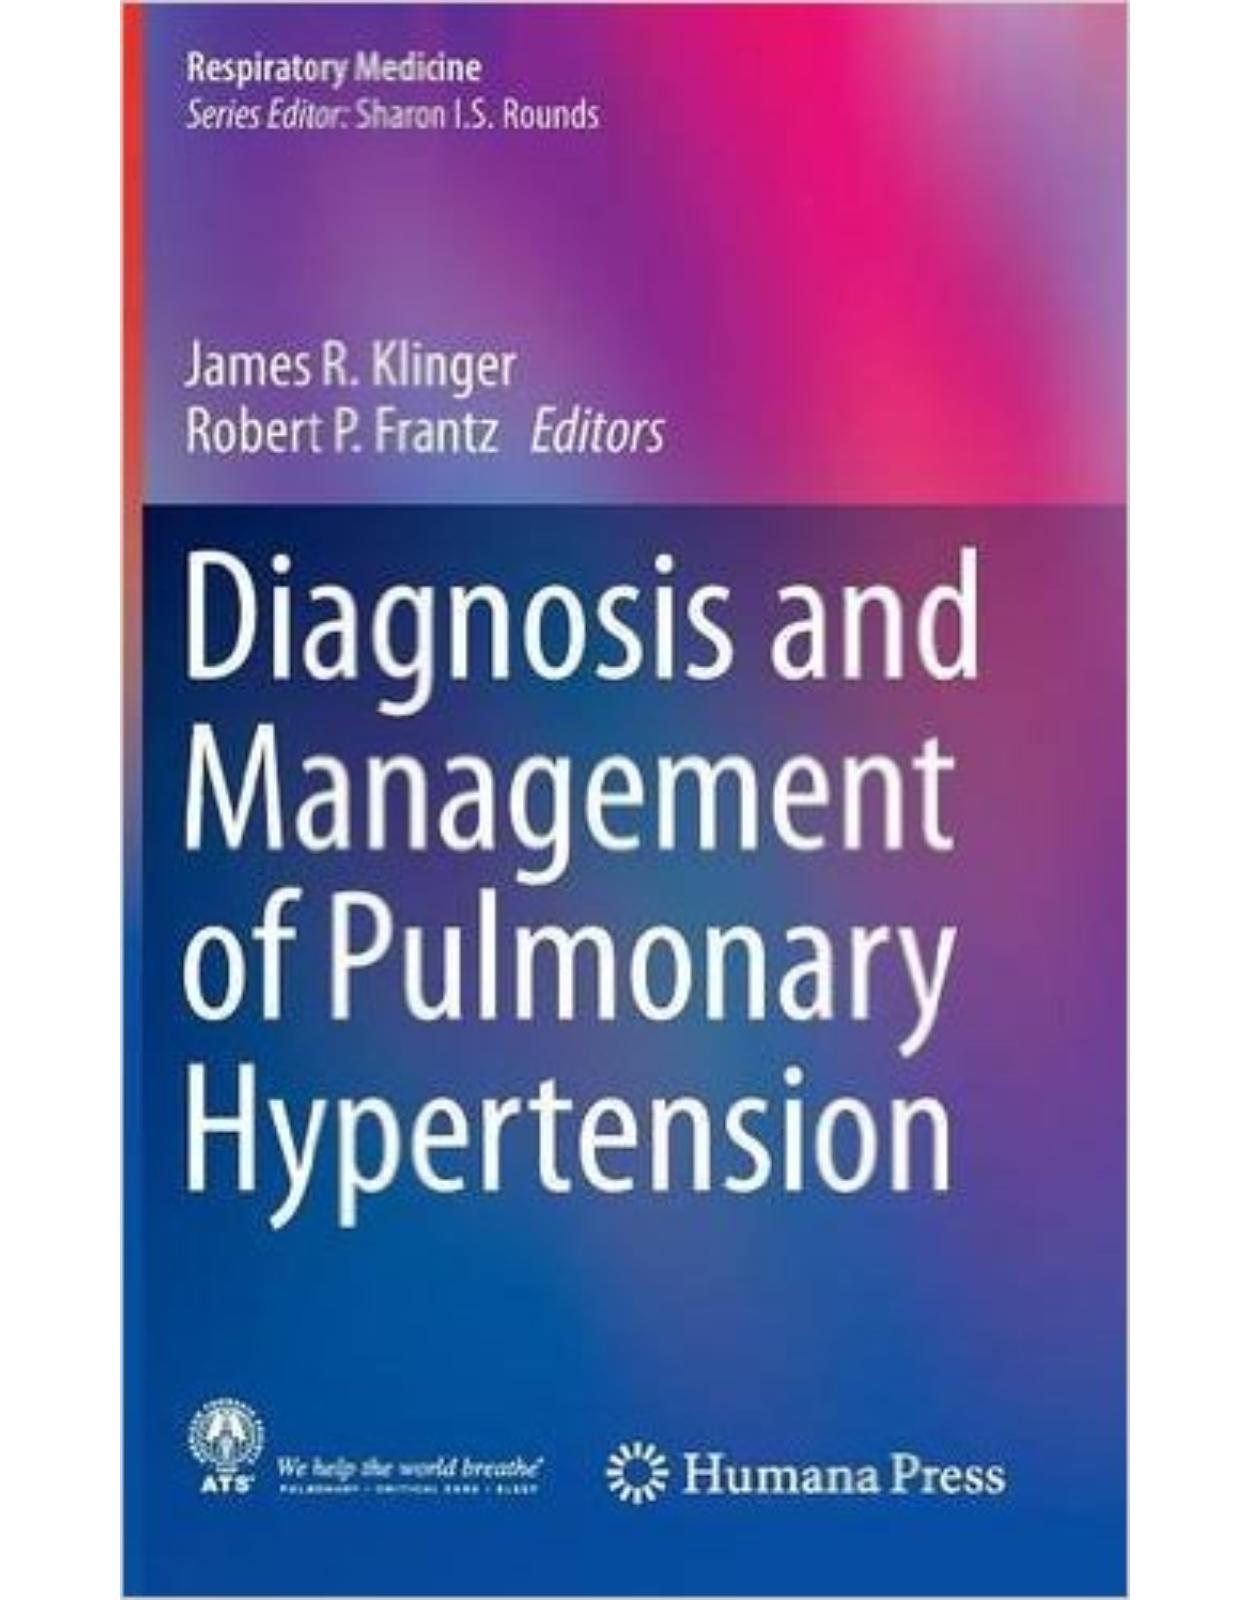 Diagnosis and Management of Pulmonary Hypertension (Respiratory Medicine)